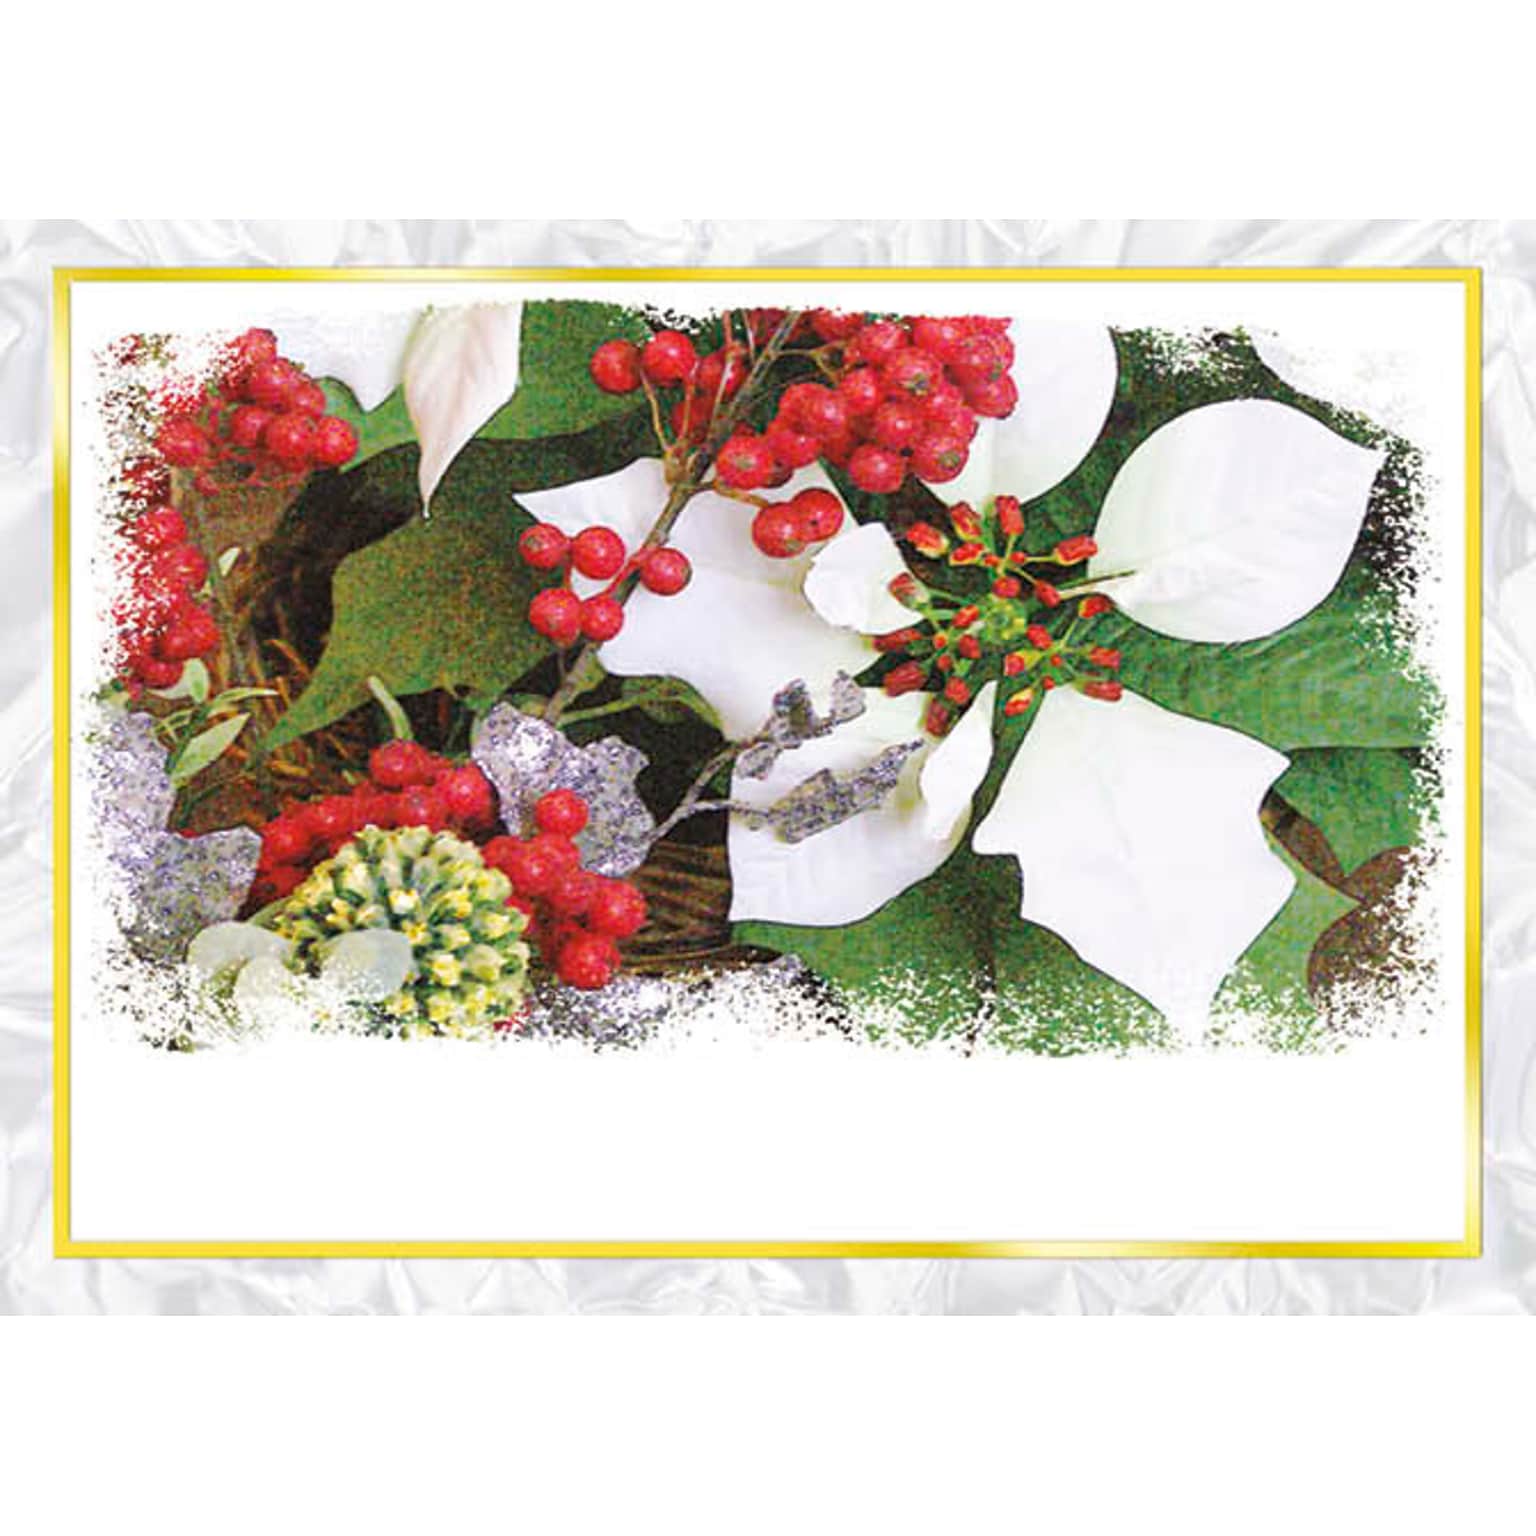 Pointsettias And Berries Holiday Greeting Cards, With A7 Envelopes, 7 x 5, 25 Cards per Set